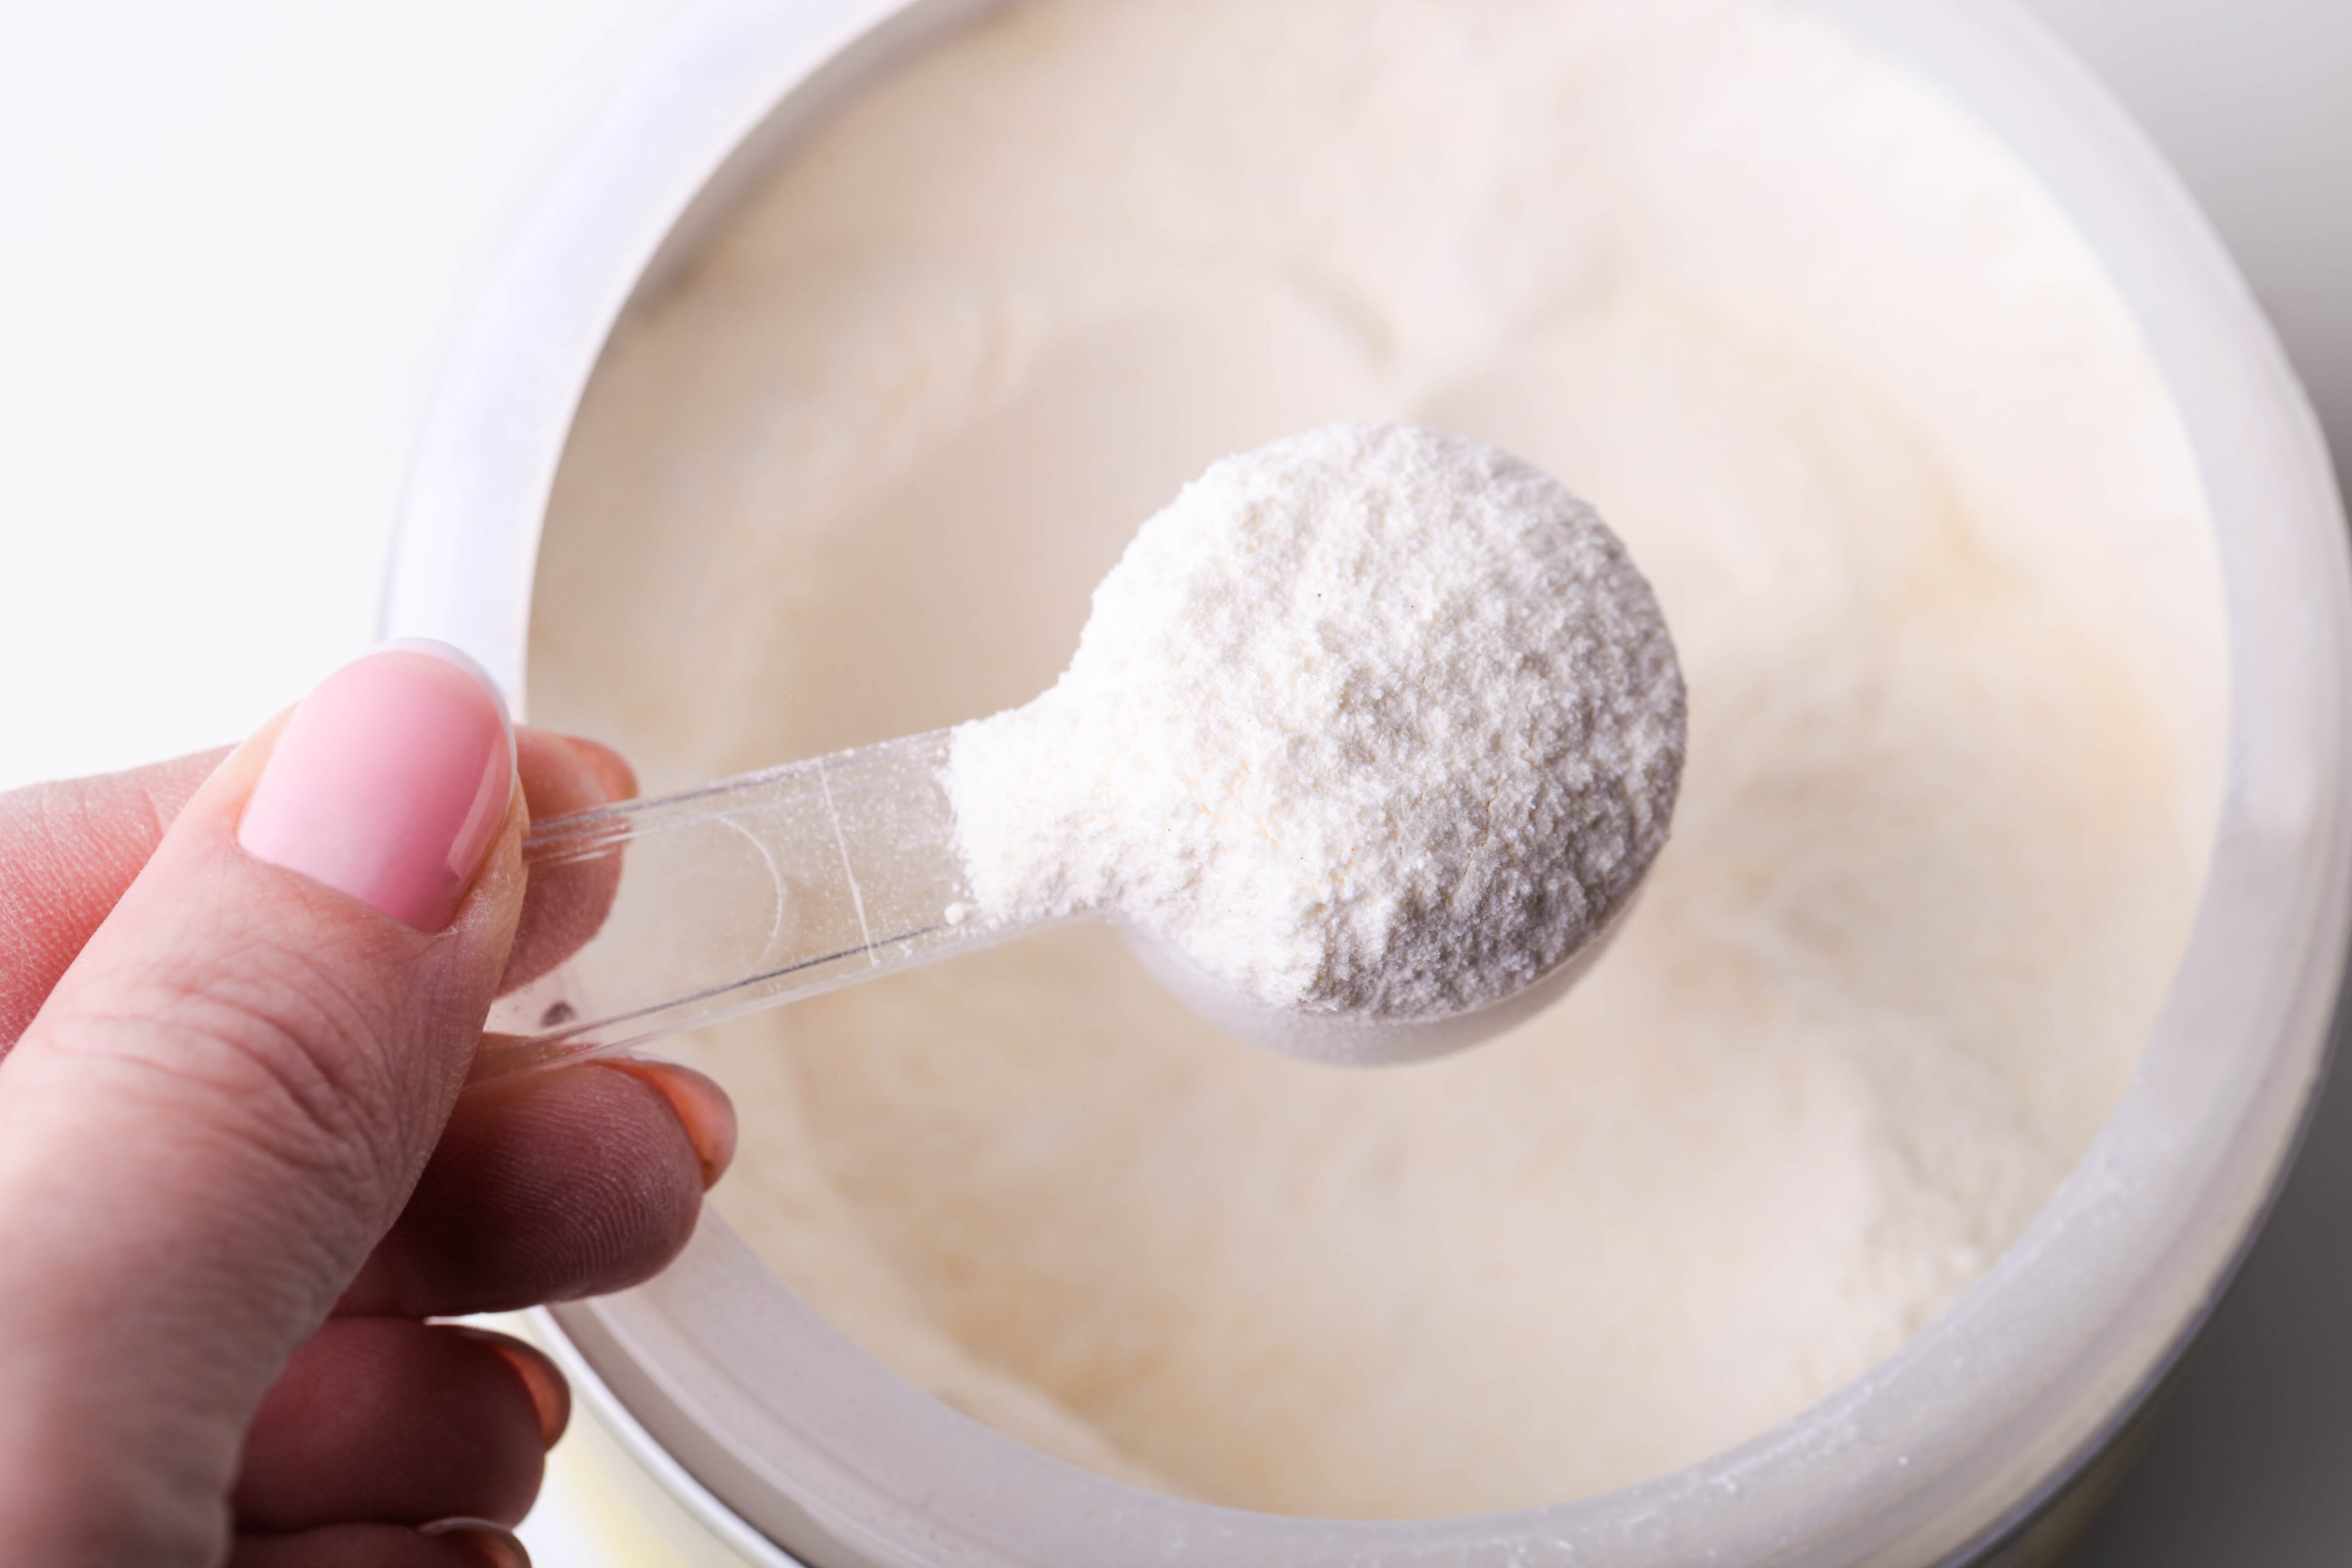 Dry scooping protein powders is the latest trend on TikTok - here's why  it's so dangerous